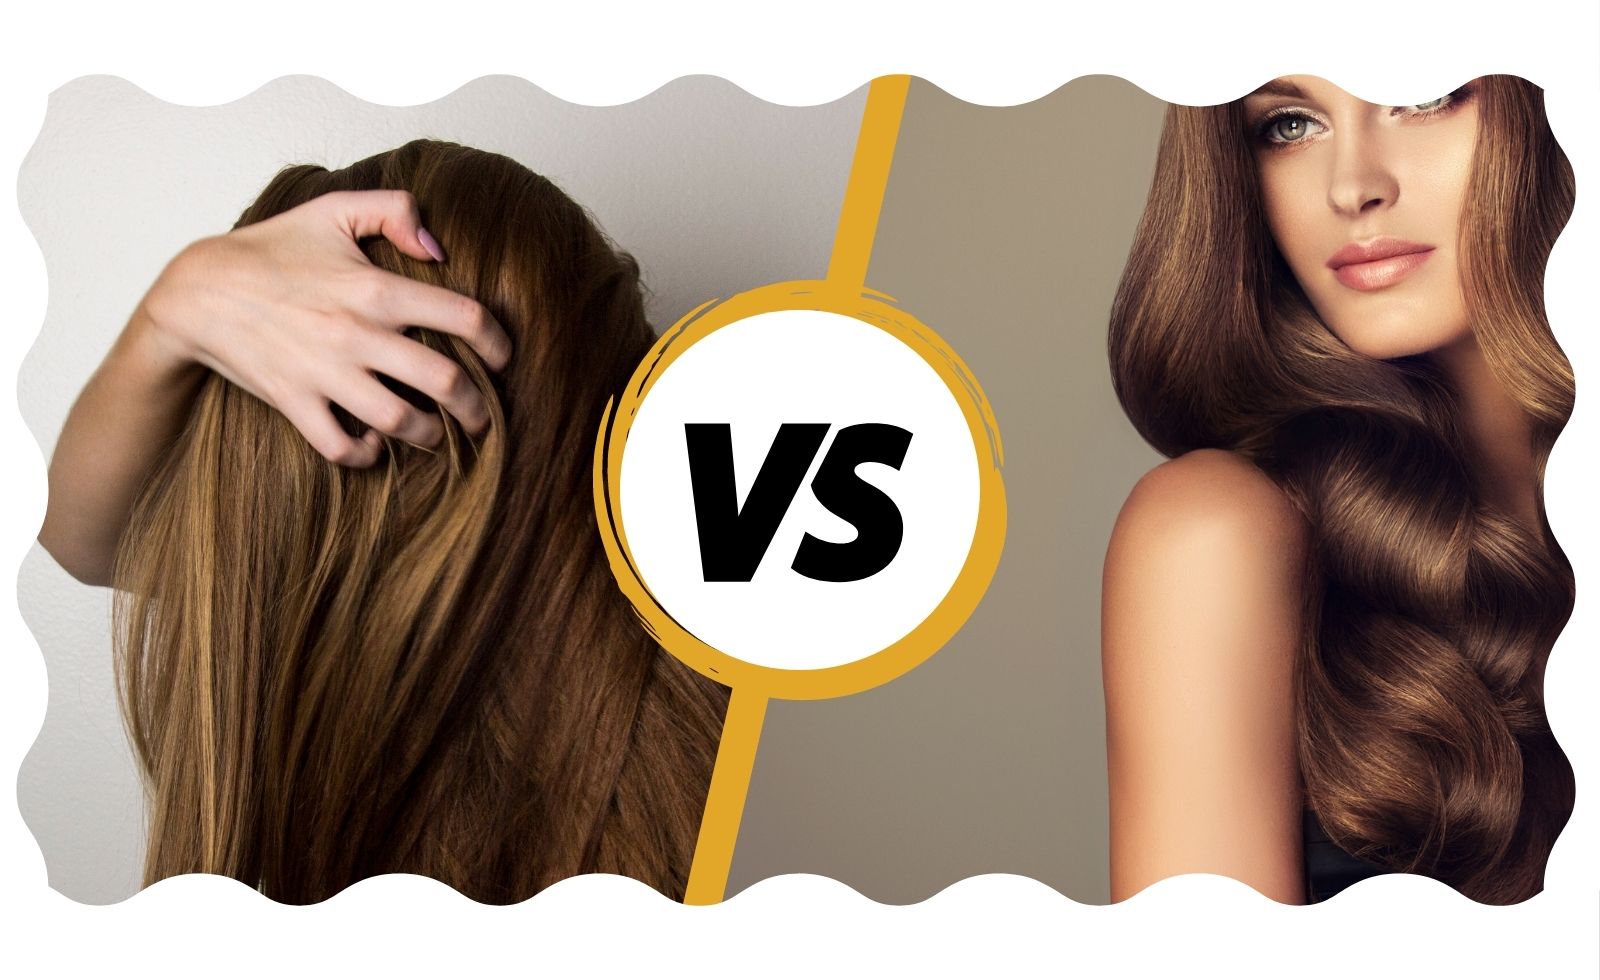 Difference between rebonding and smoothening - Which is better?